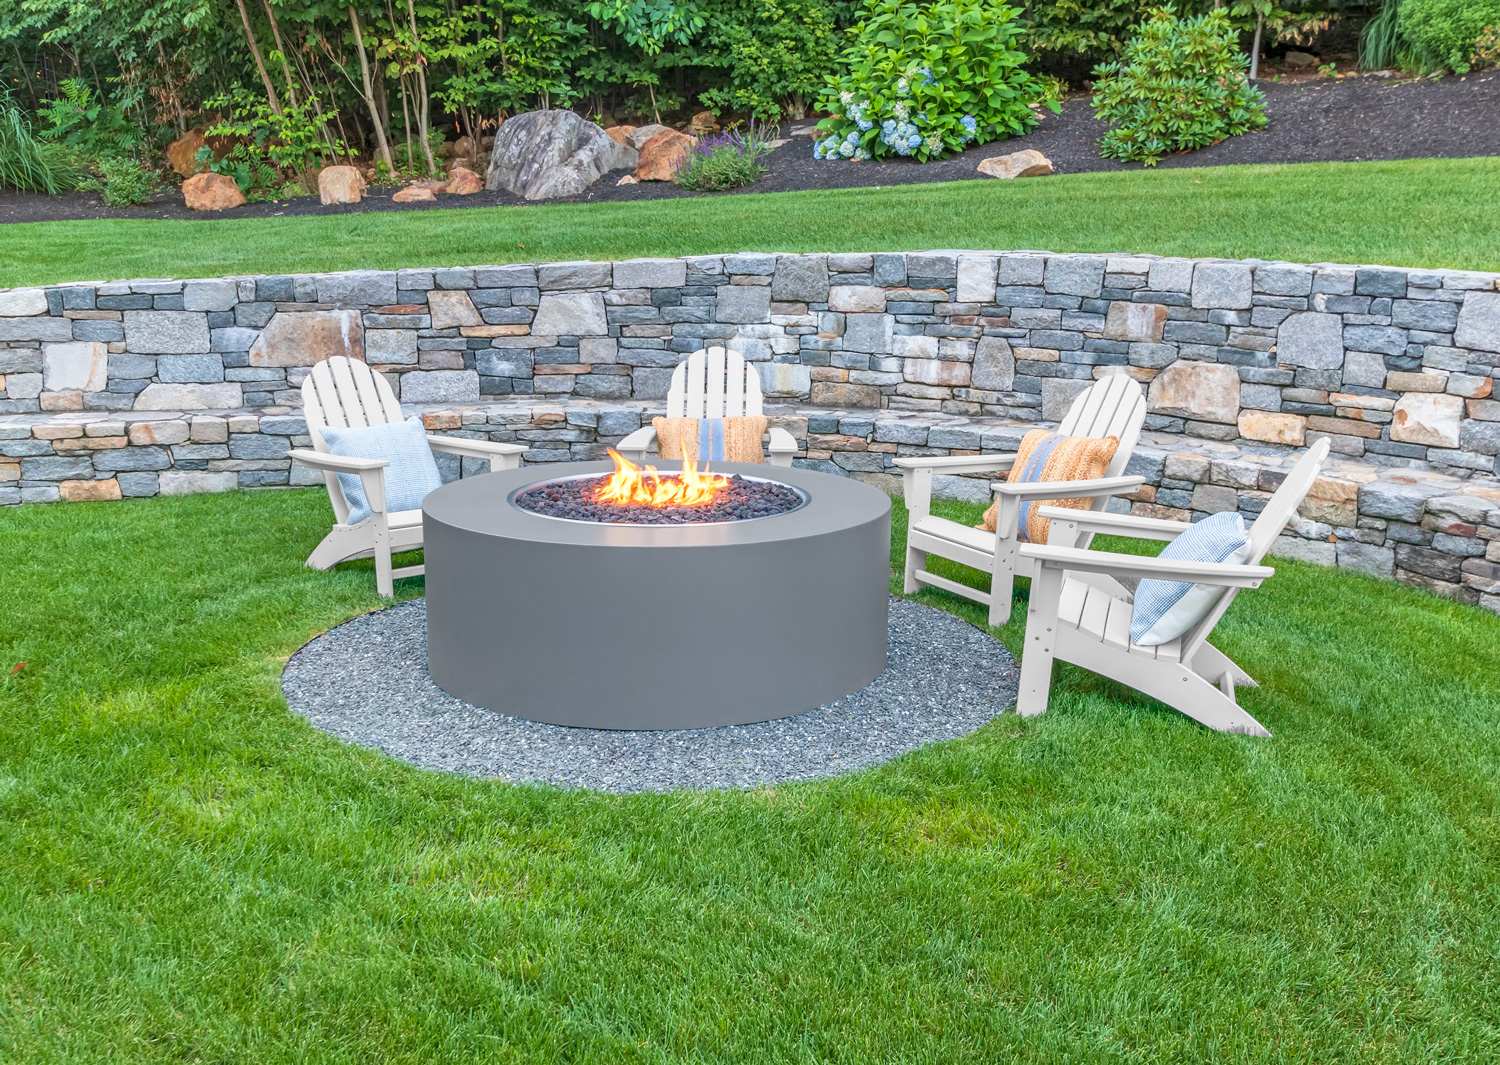 Adirondack chairs around fire pit with stone wall and lush green grass.